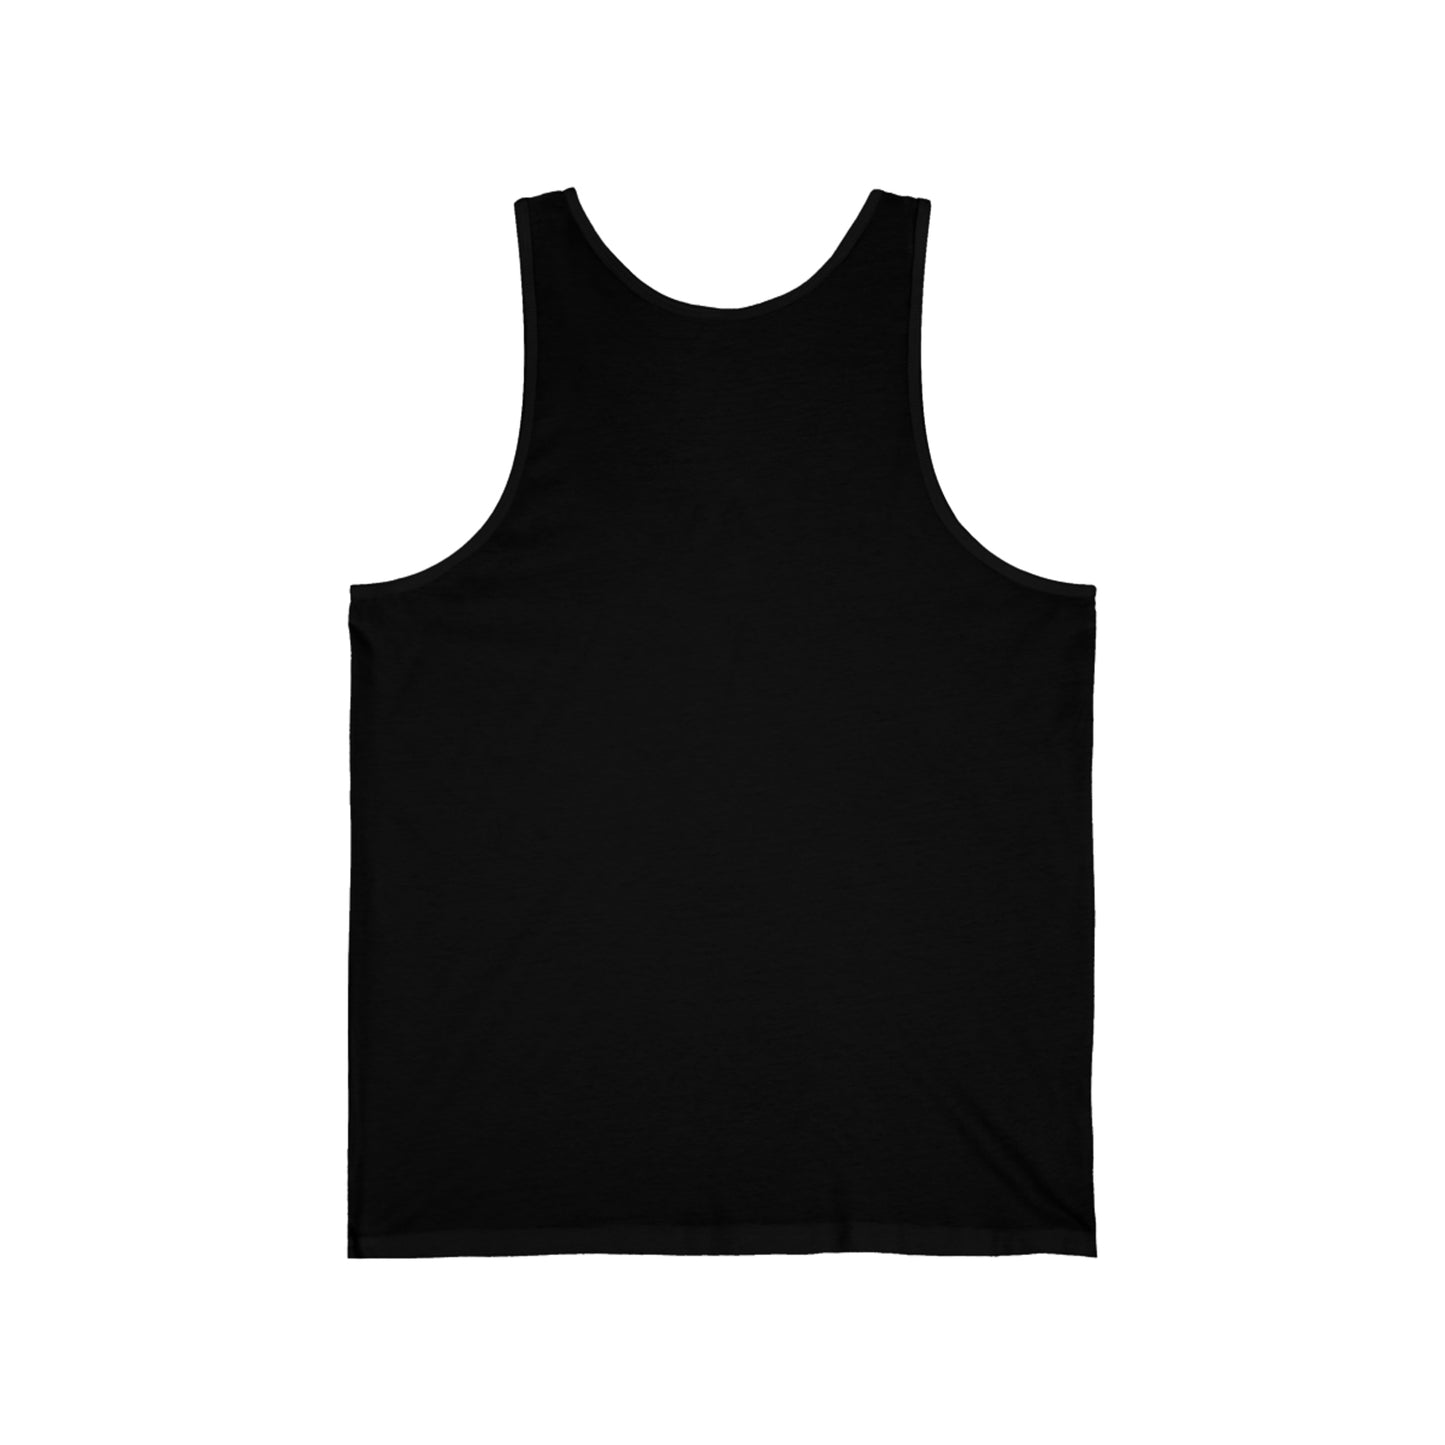 Gang Of Deadlys Tank Top Native American (Special Order)